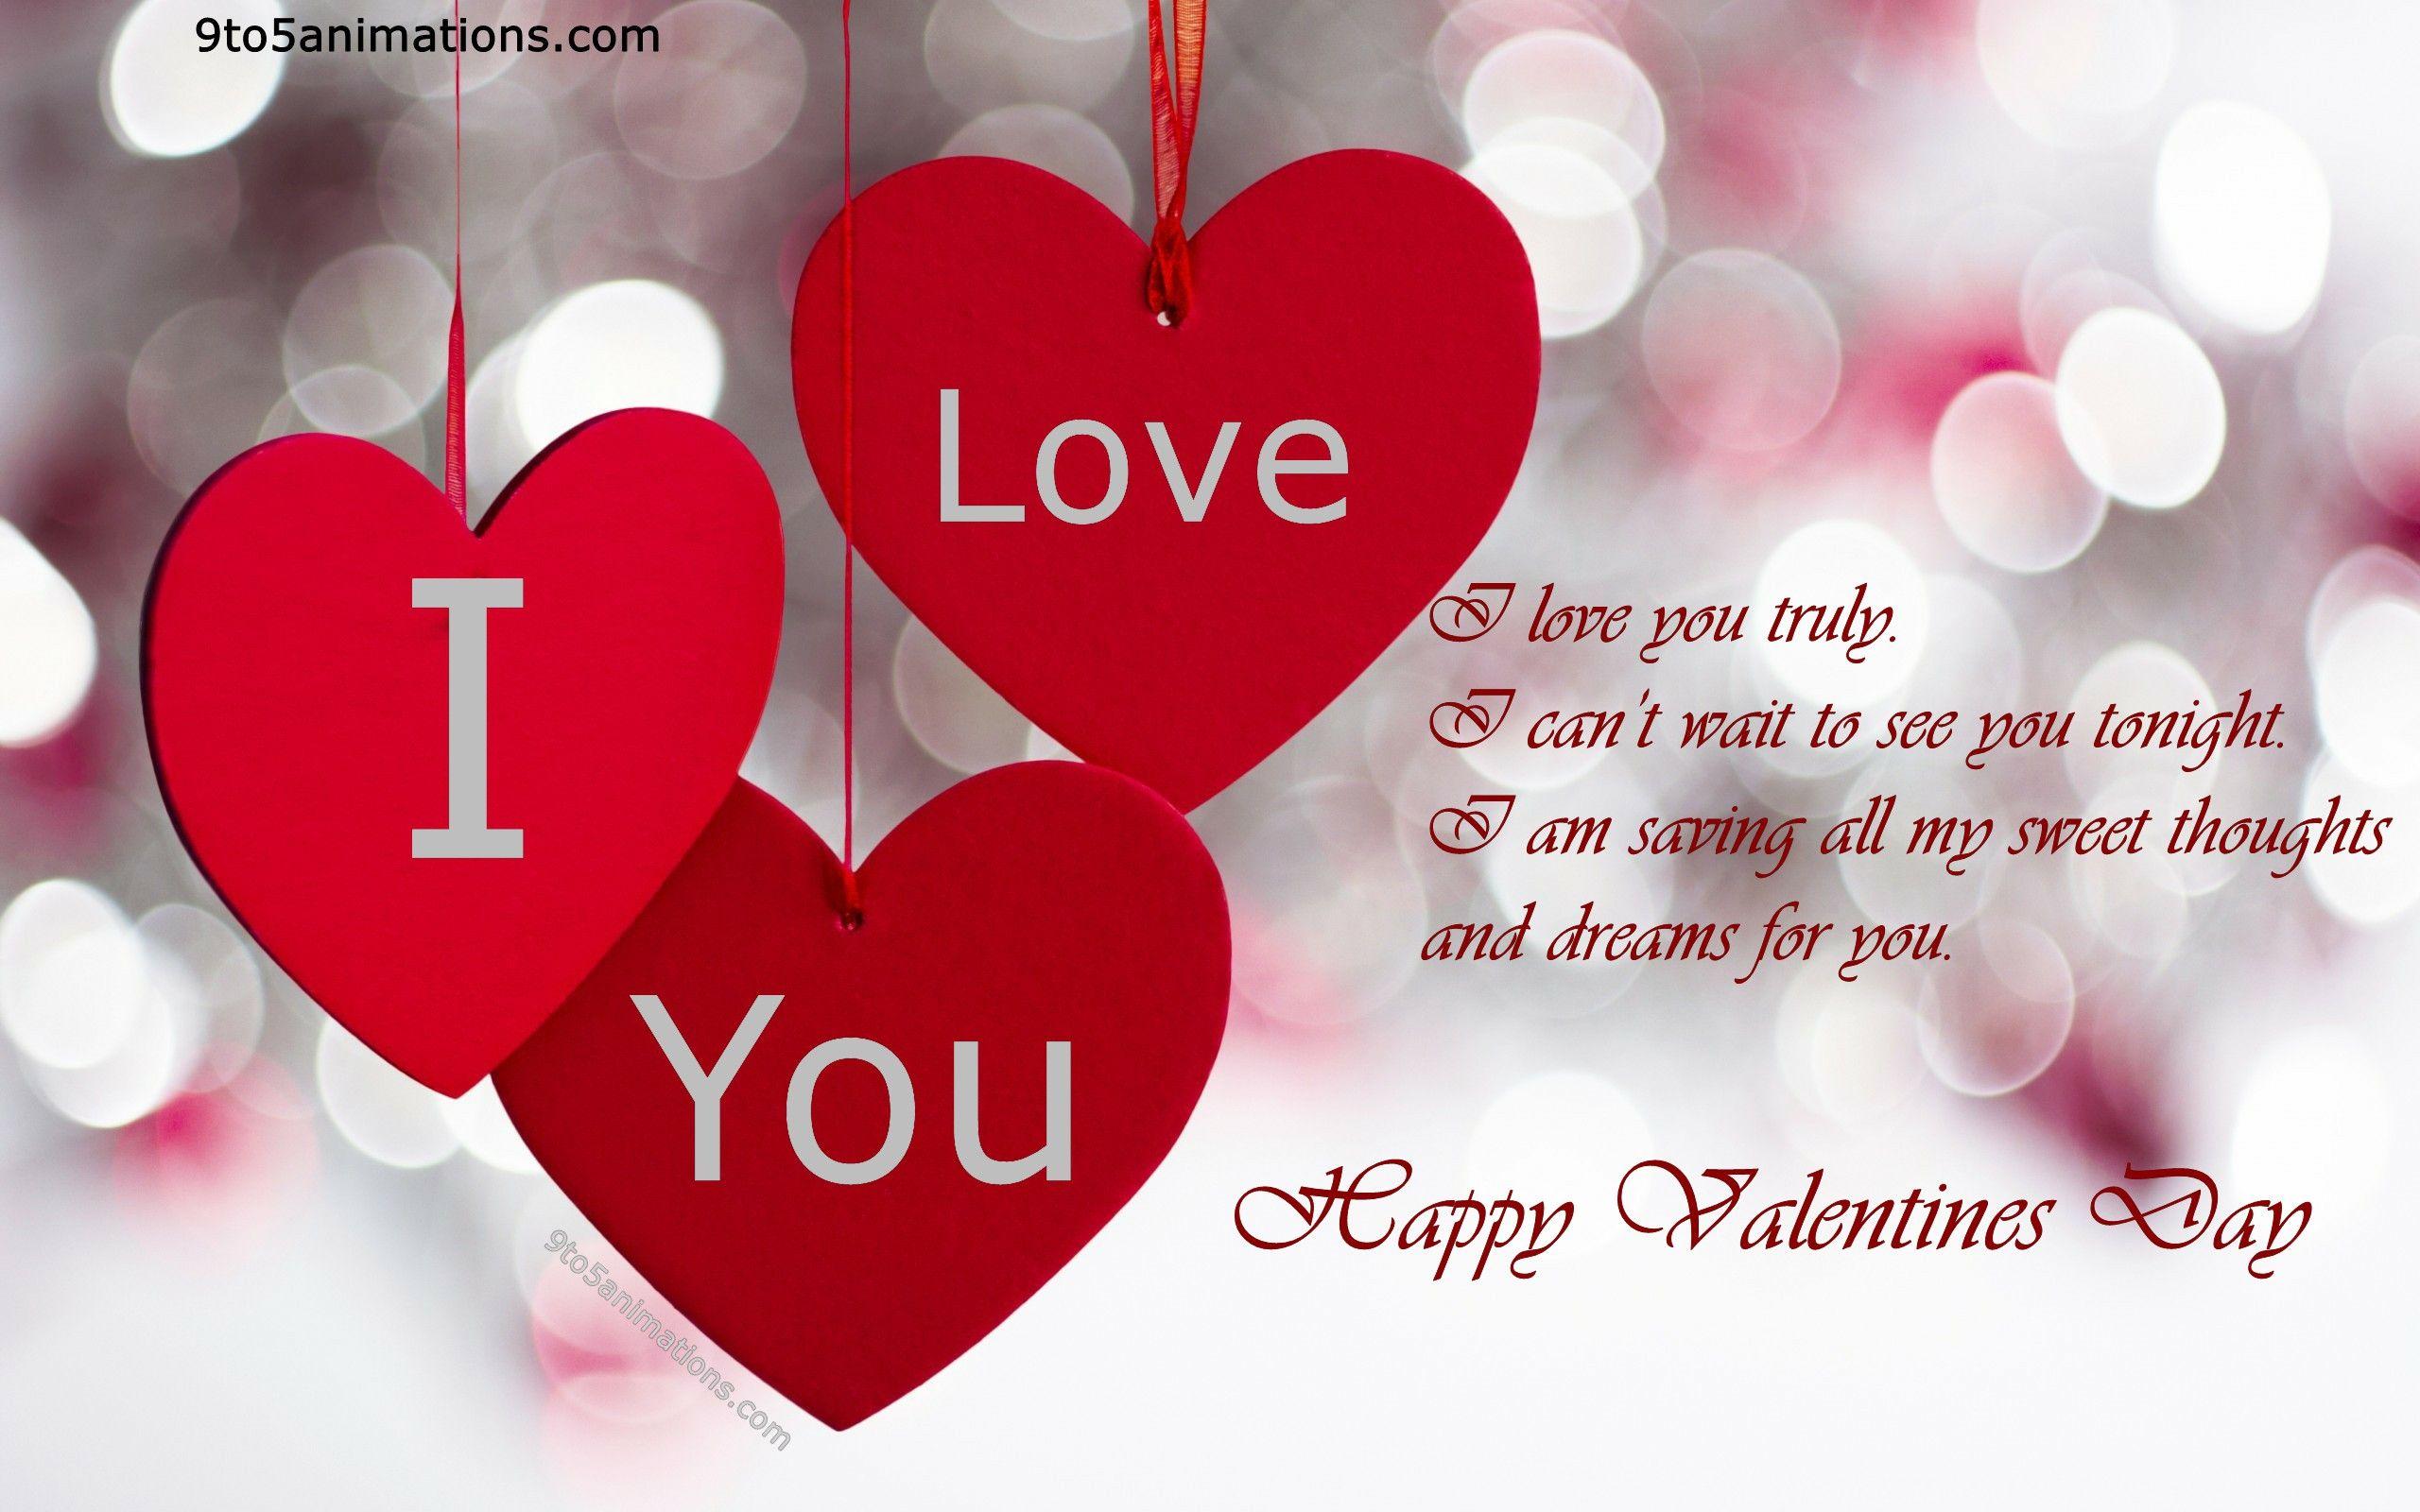 Valentines Day Quotes Image. To5Animations.Com